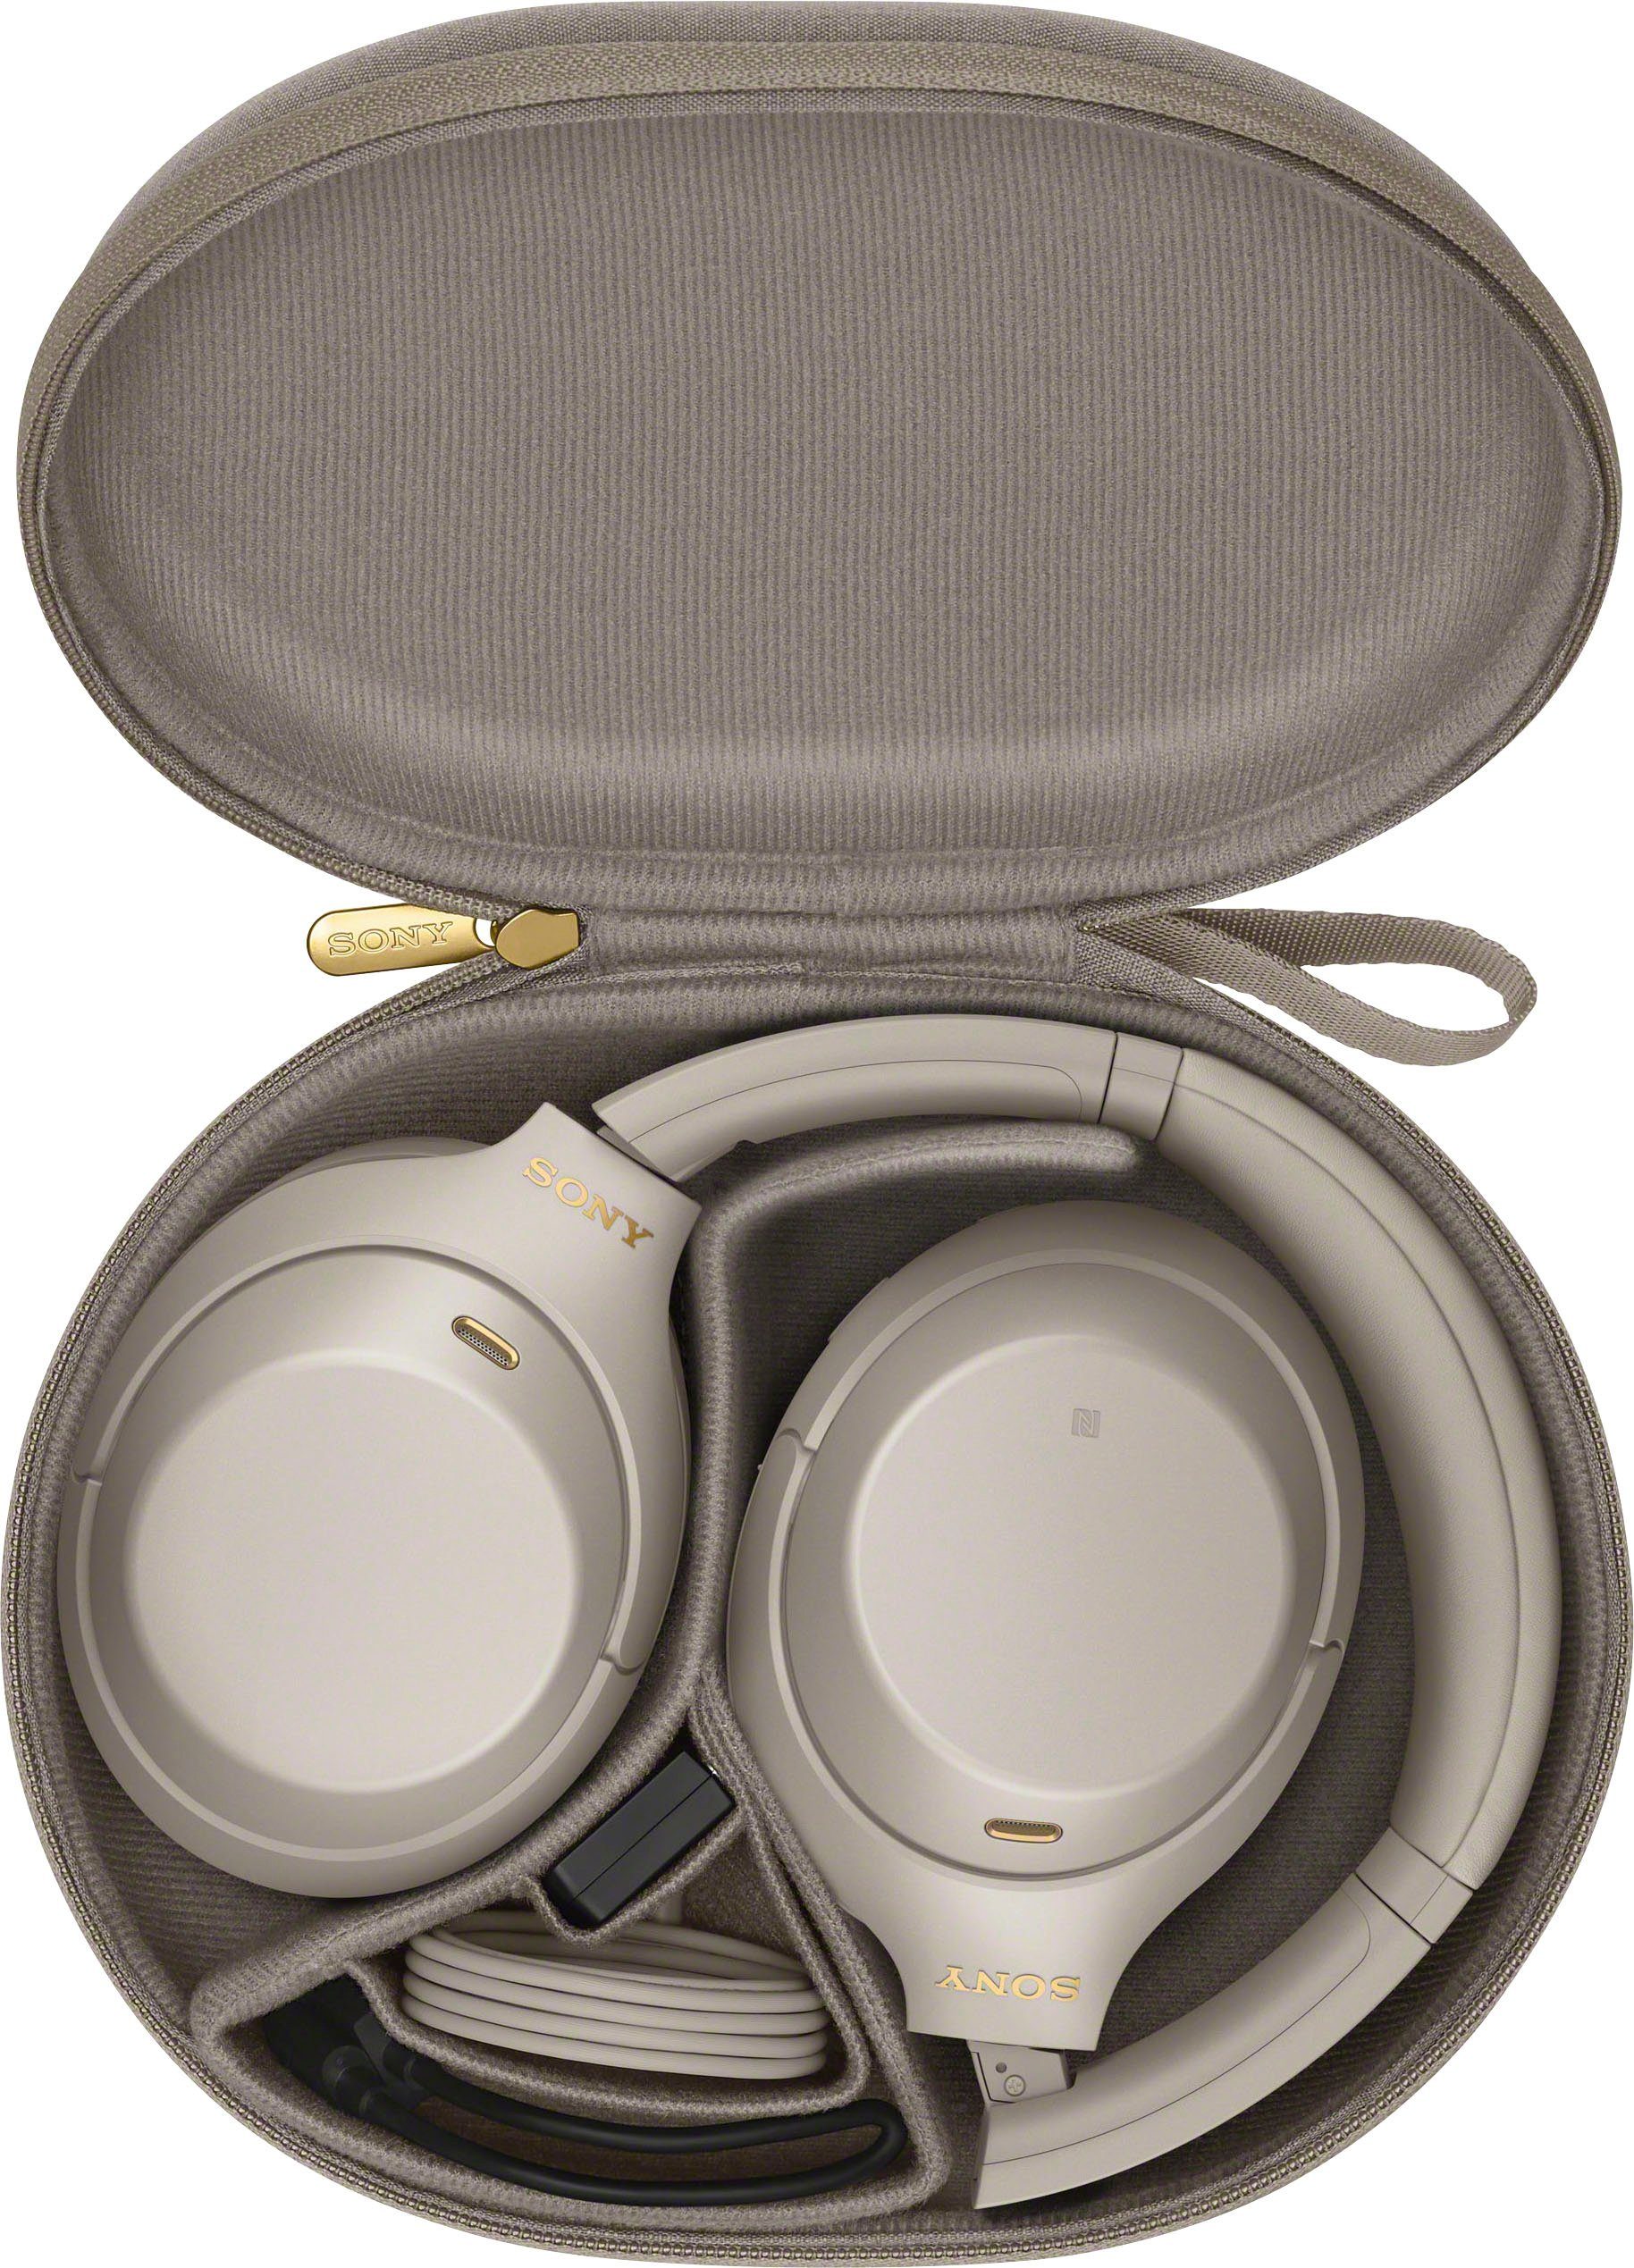 Sony via Silber NFC, Over-Ear-Kopfhörer kabelloser One-Touch WH-1000XM4 Schnellladefunktion) Sensor, Touch NFC, (Noise-Cancelling, Bluetooth, Verbindung